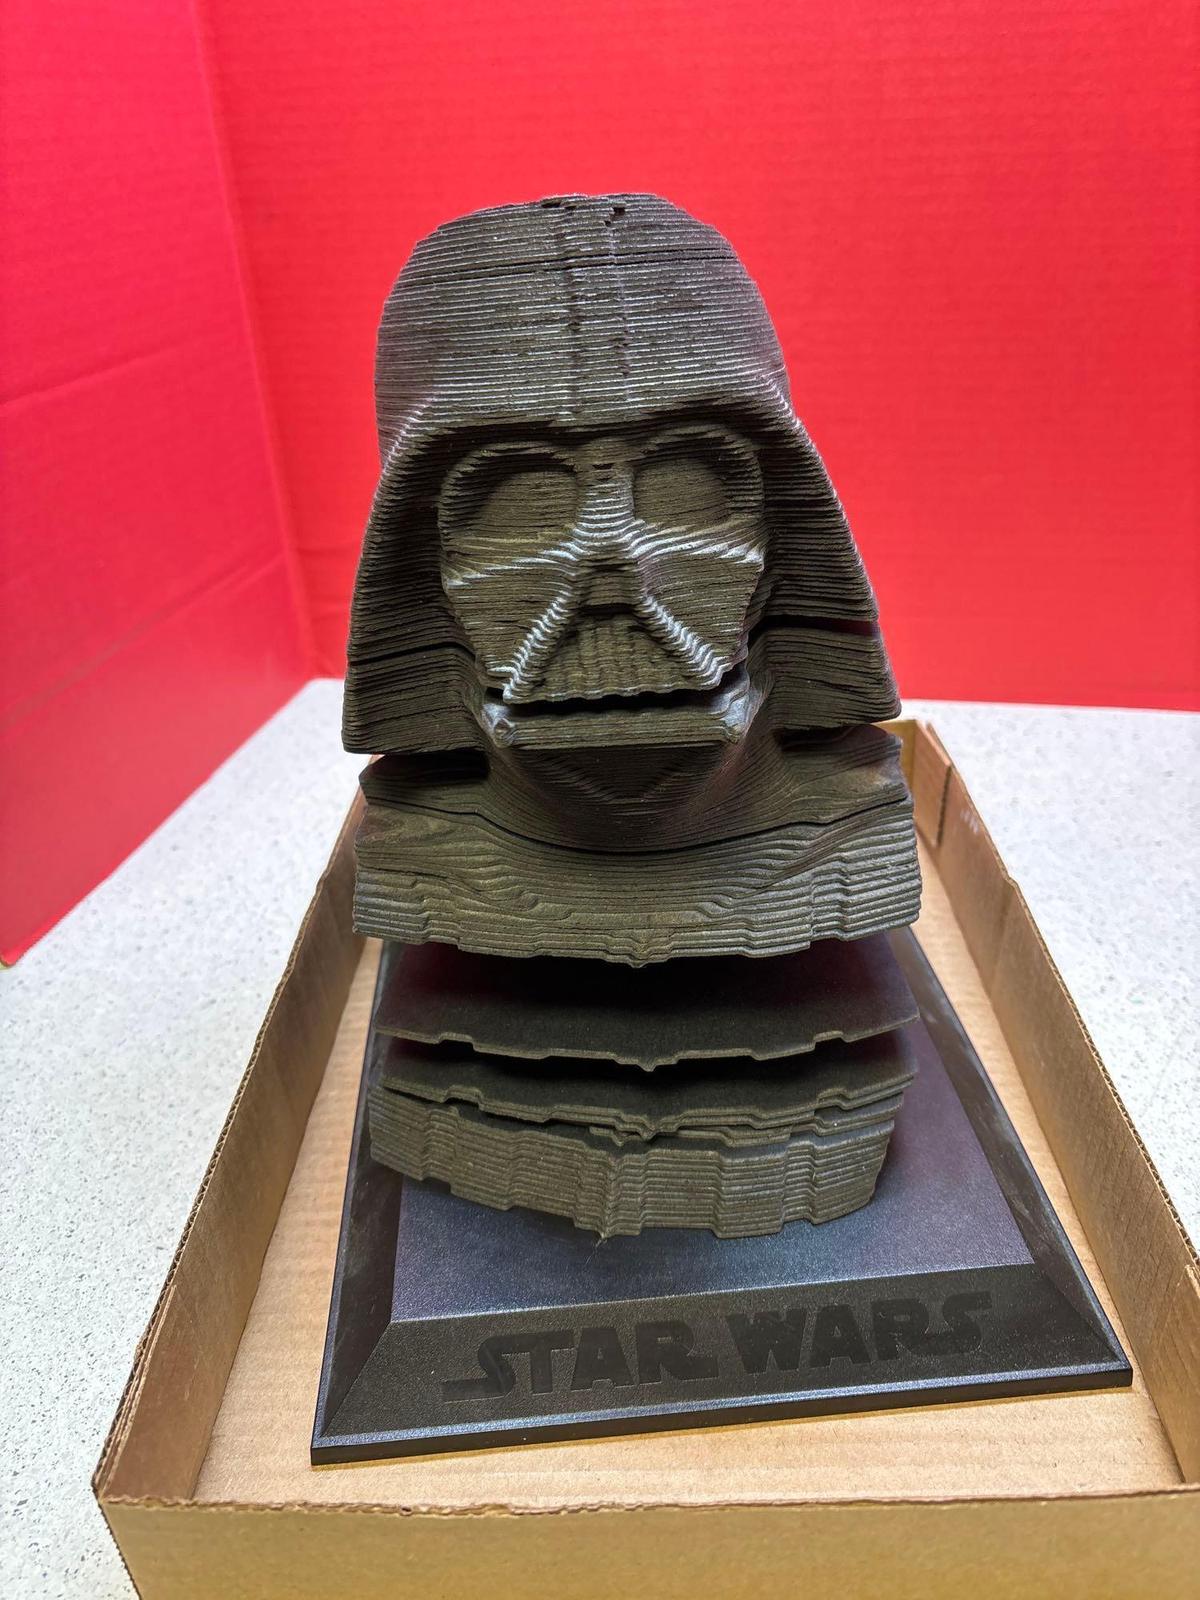 Darth Vader Bust 3-D puzzle